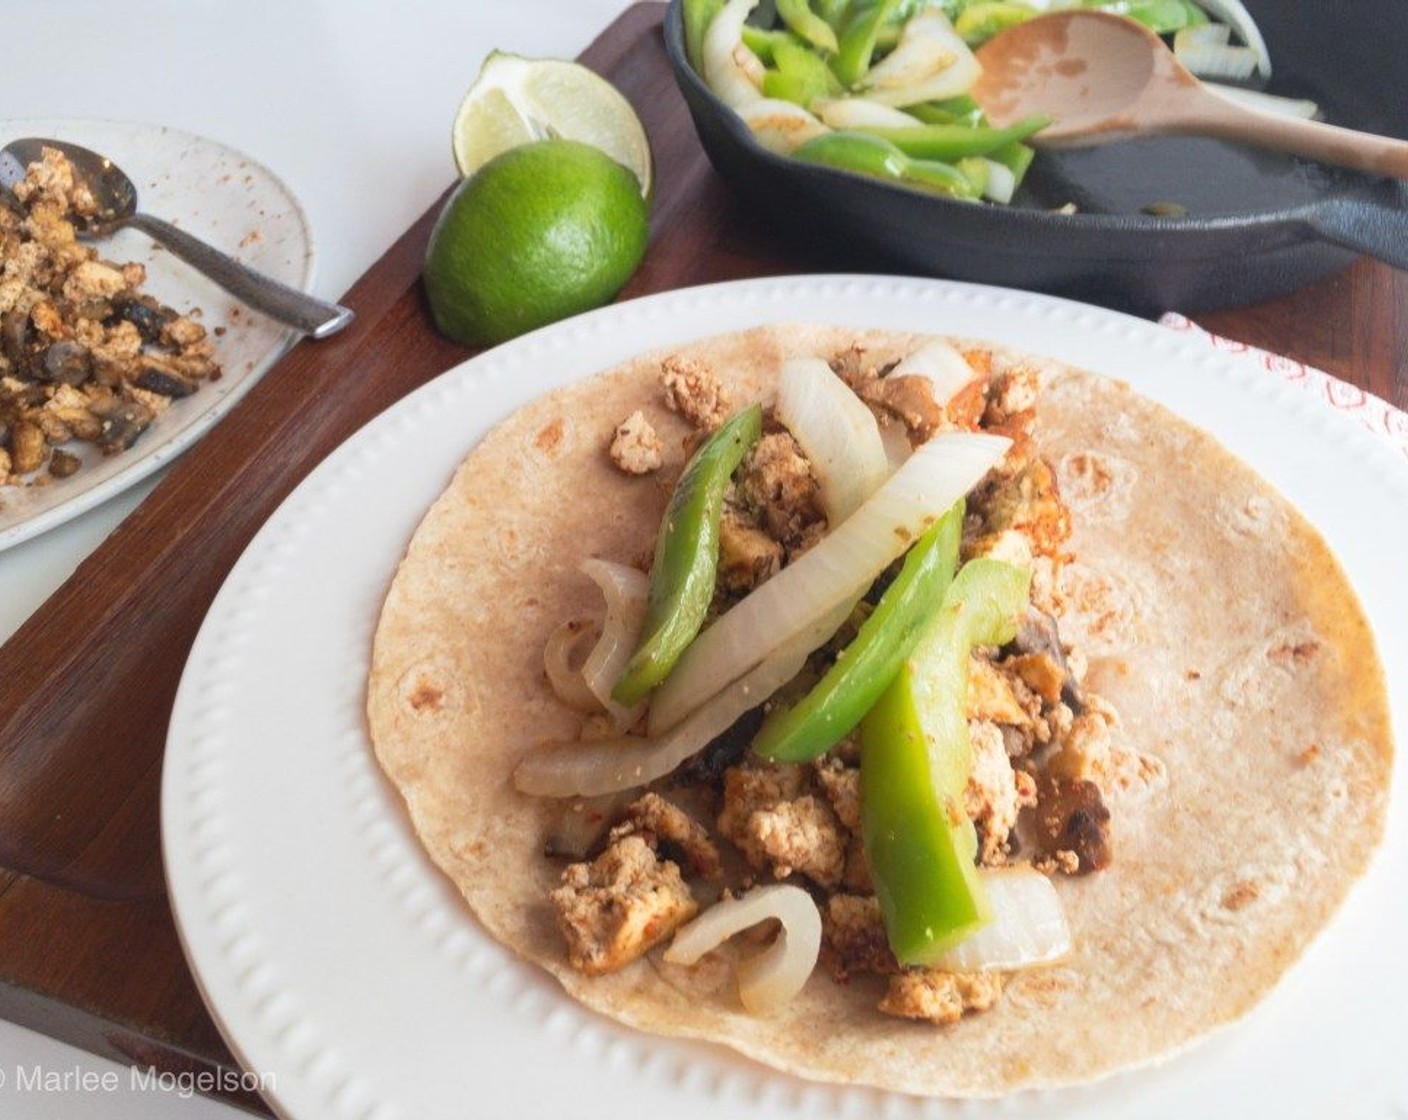 step 6 To warm Whole Wheat Tortillas (5) heat individually for 10-20 seconds in the microwave if desired. Add 1/5 of tofu mix to each tortilla and as many veggies as you like. Wrap and enjoy!